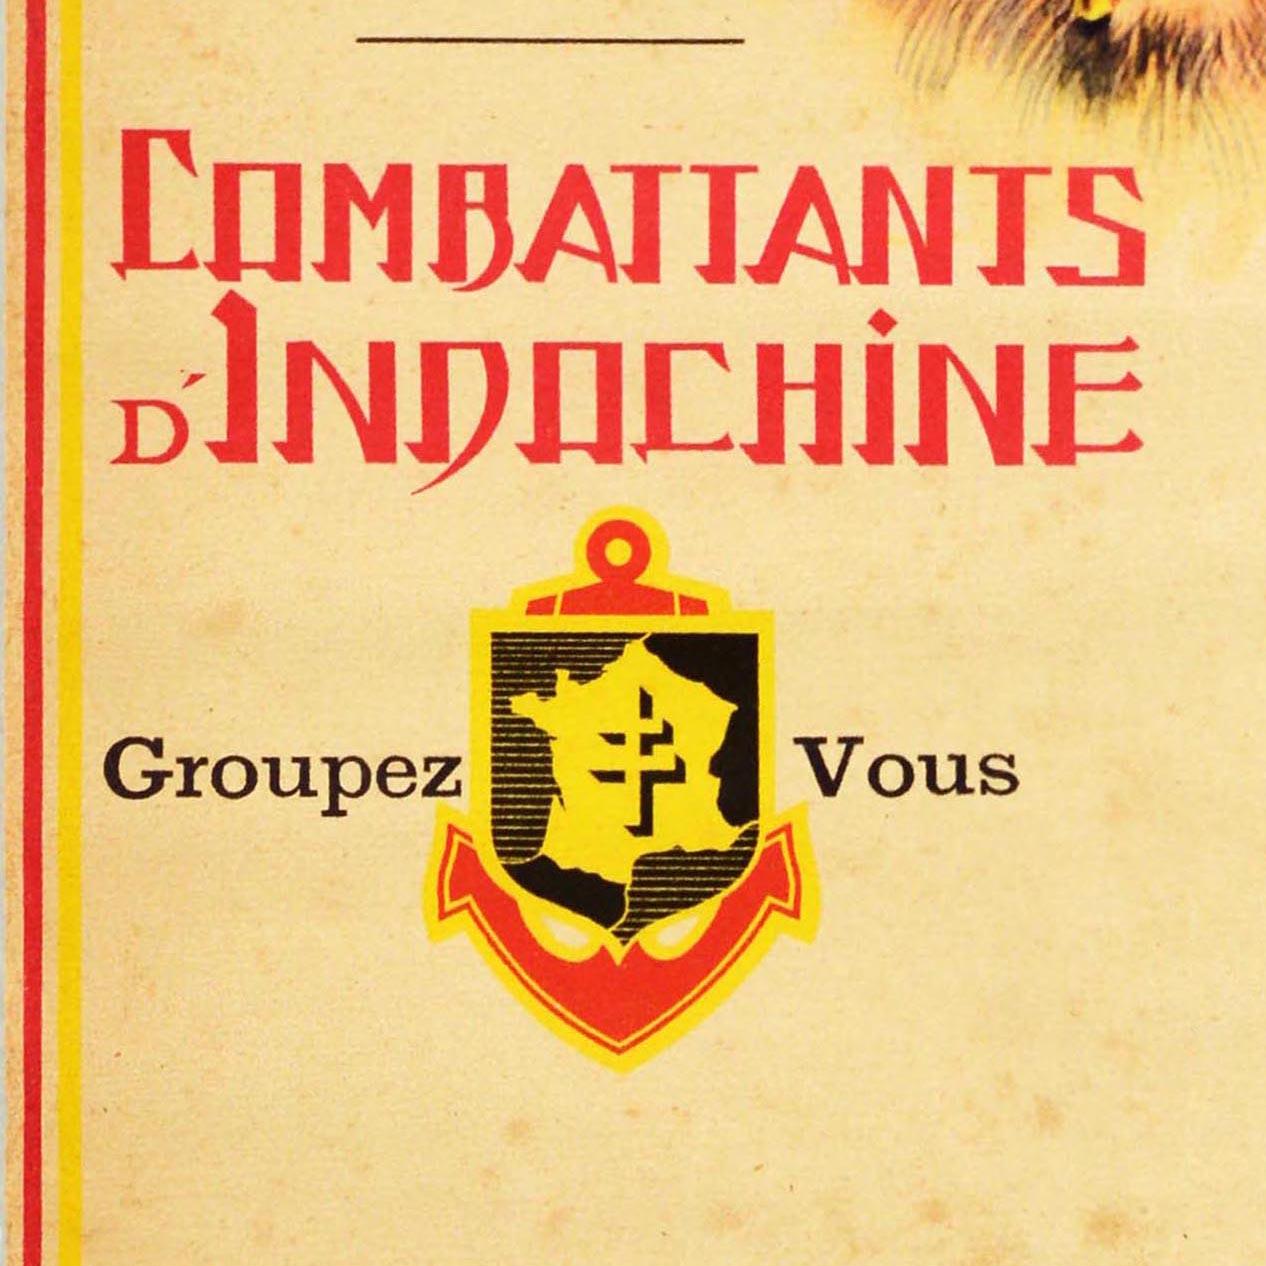 Original Vintage Propaganda Poster Combattants Indochine French Corps Indochina - Print by Unknown